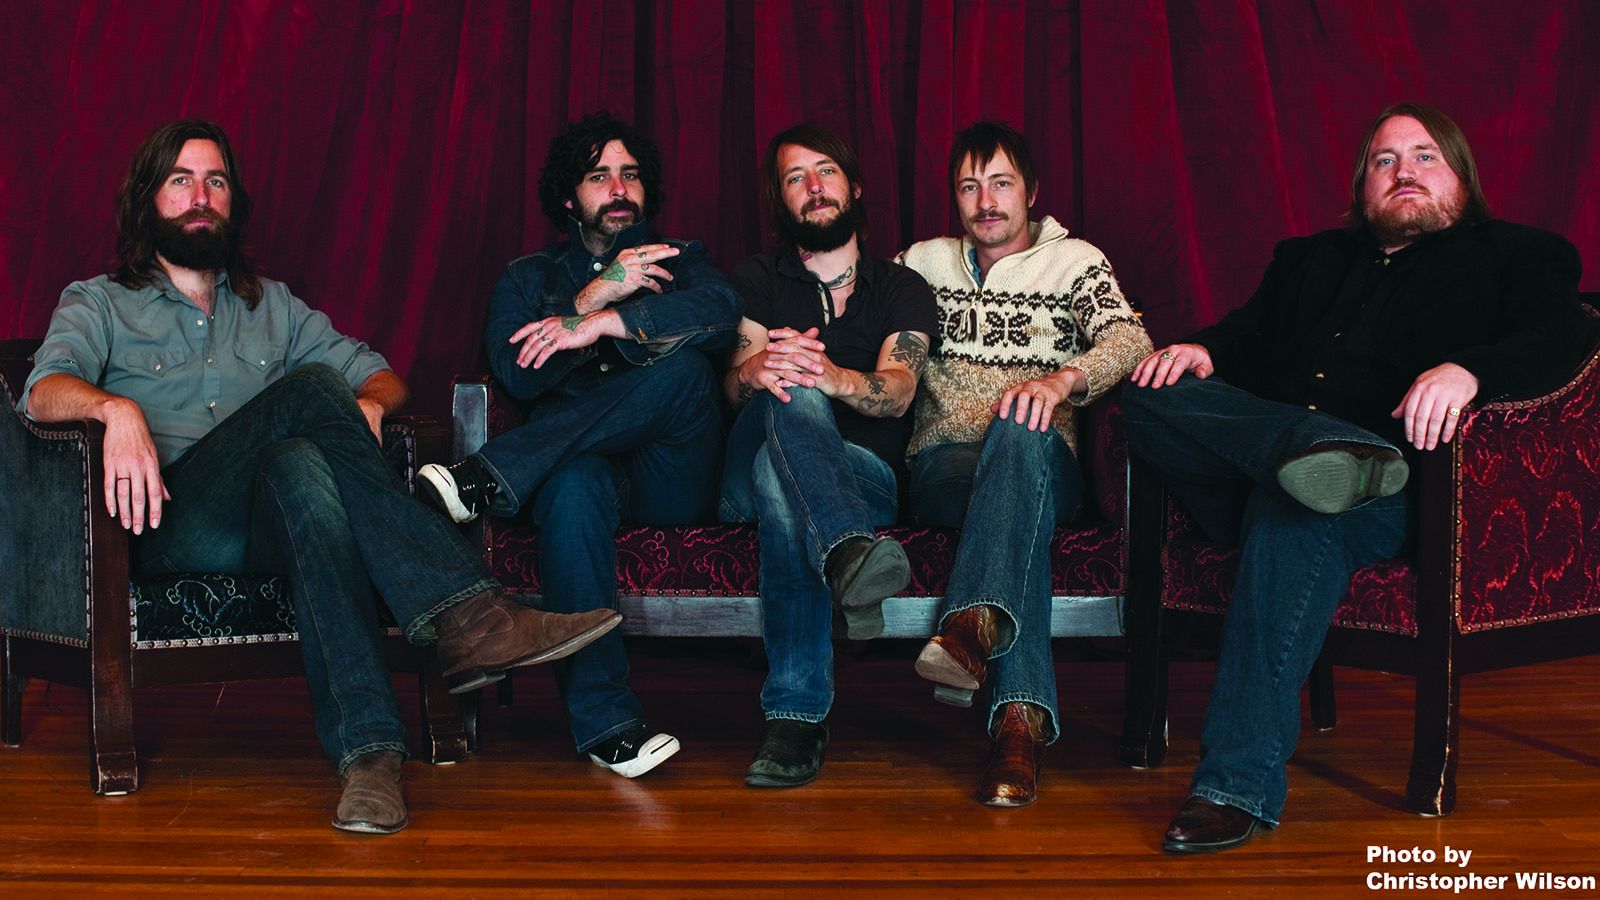 Band of Horses will be at The Clyde Theatre on Wednesday, July 10. Tickets go on sale Friday, April 19.